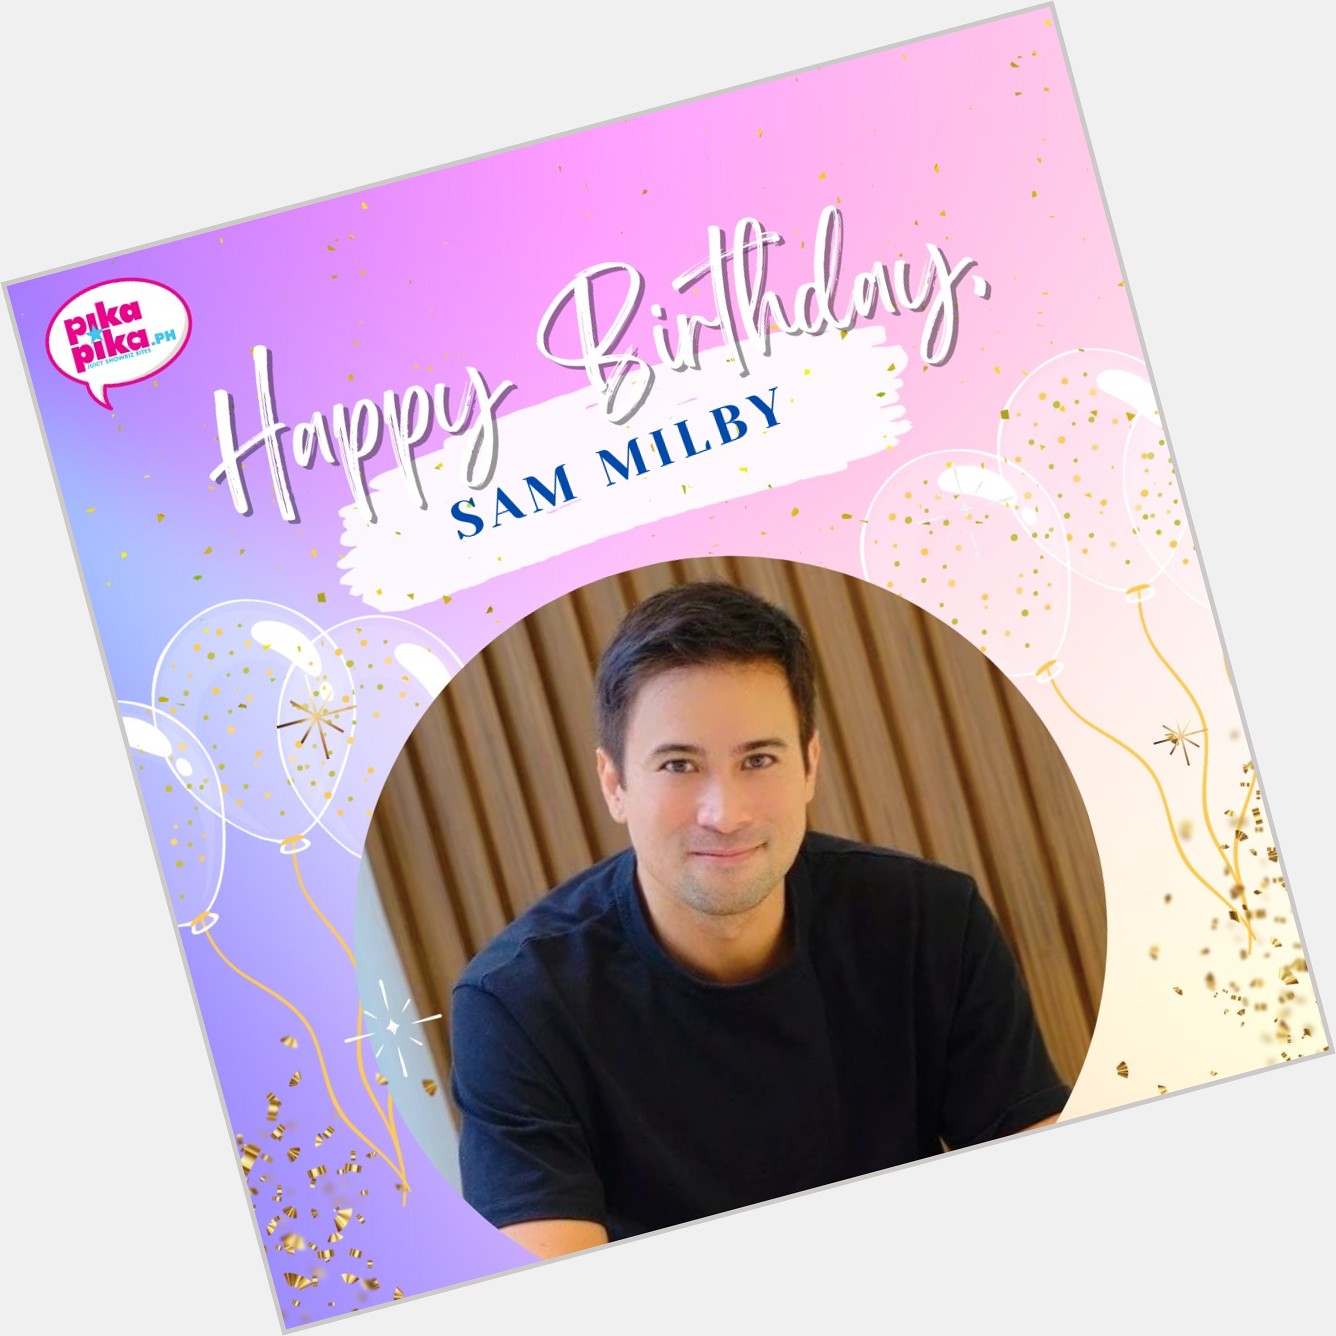 Happy birthday, Sam Milby! May your special day be filled with love and cheers.    